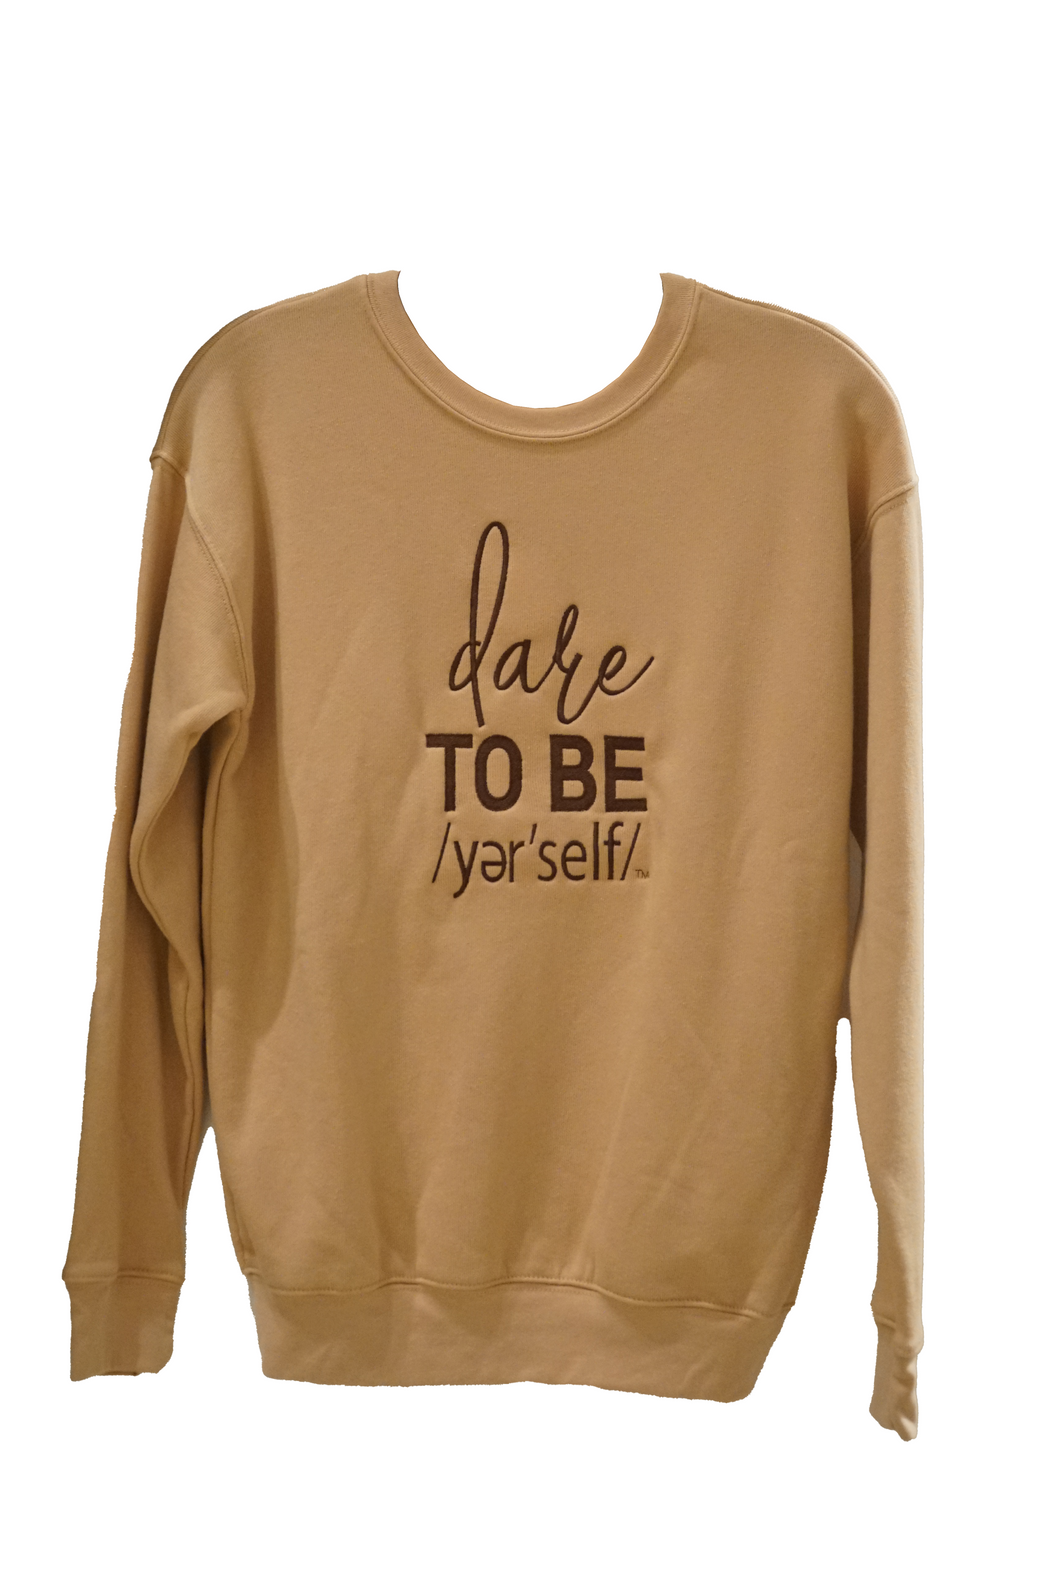 TAN CREWNECK WITH DARK EMBROIDERED DTB YER'SELF